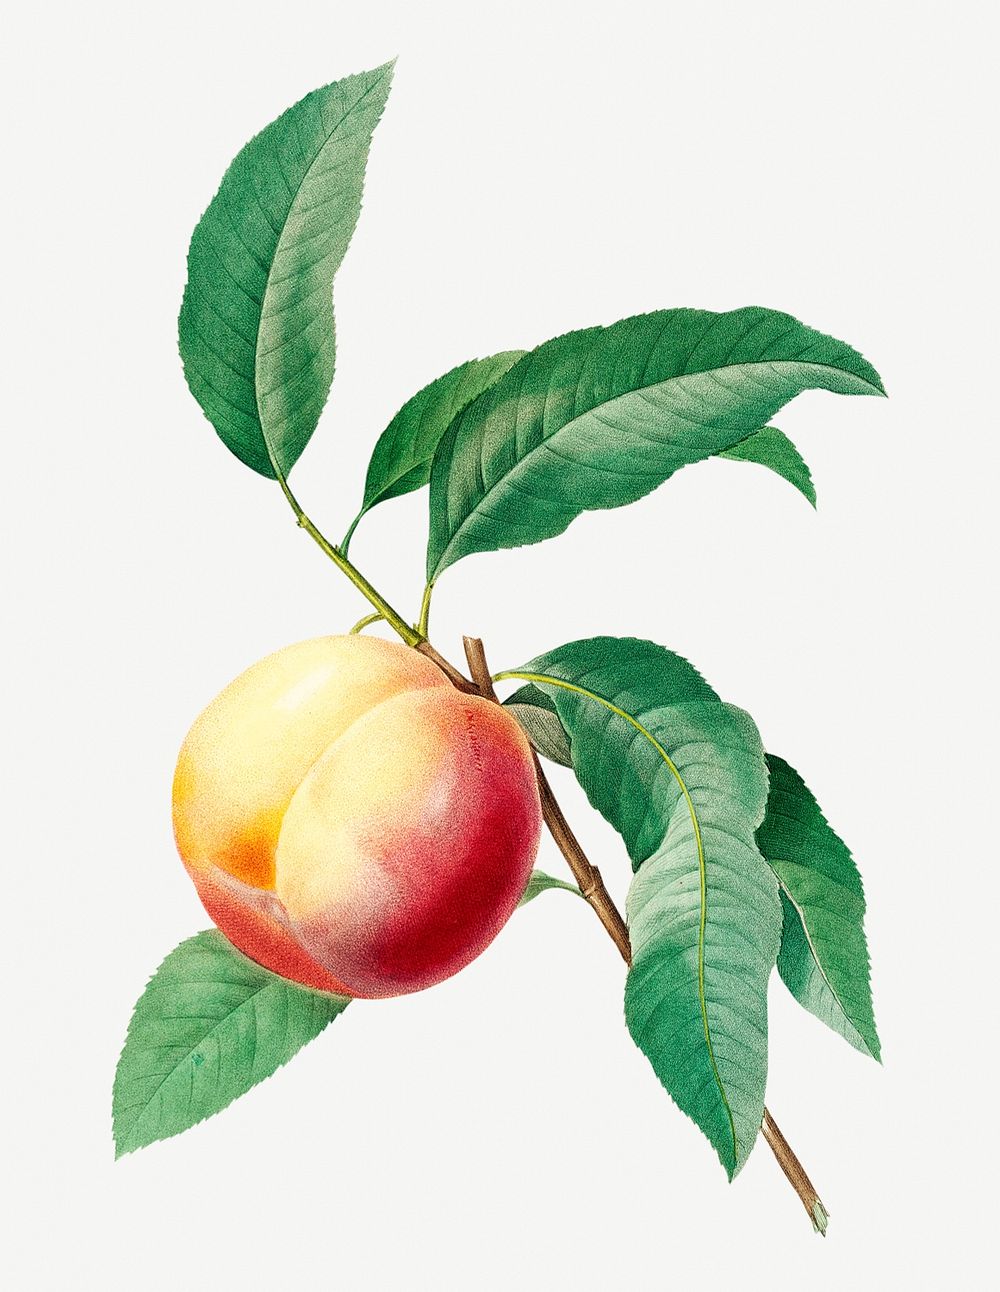 Peach fruit on branch psd botanical illustration, remixed from artworks by Pierre-Joseph Redout&eacute;